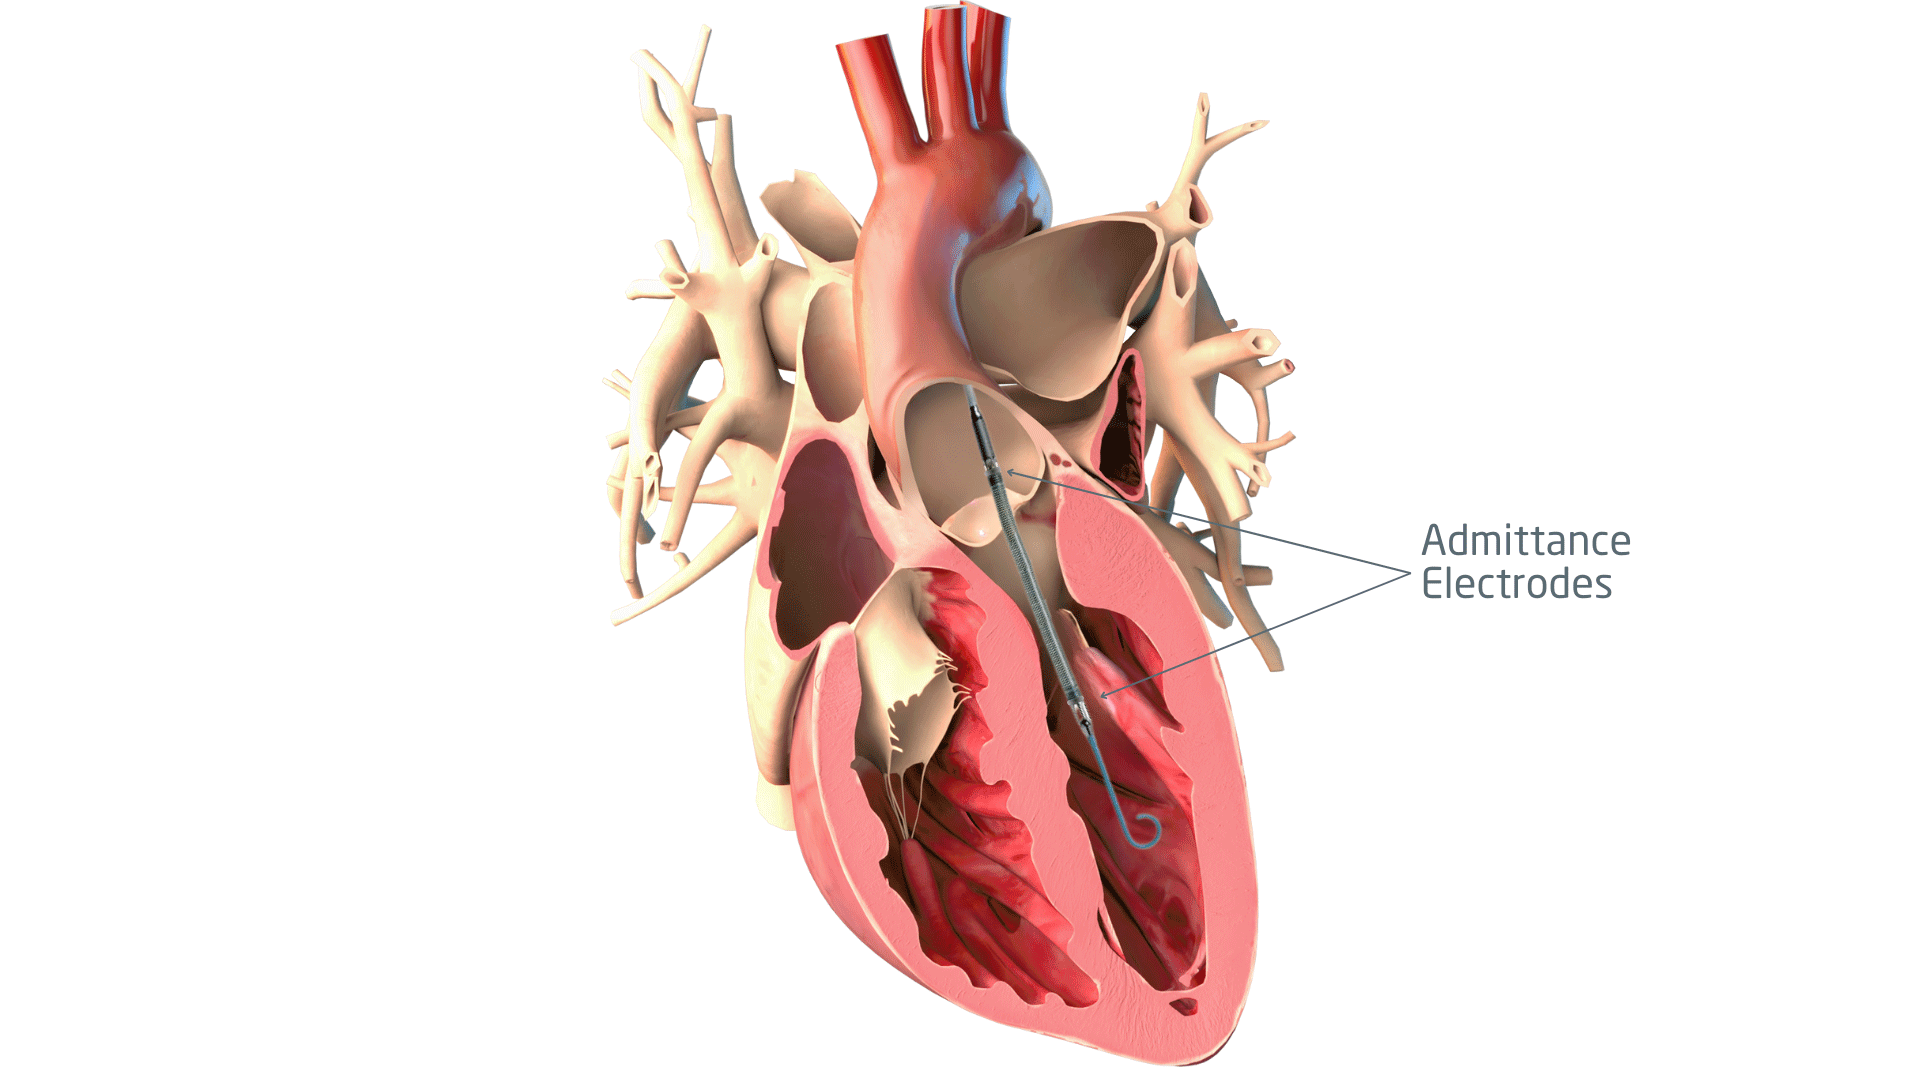 A diagram of the human body highlighting the heart